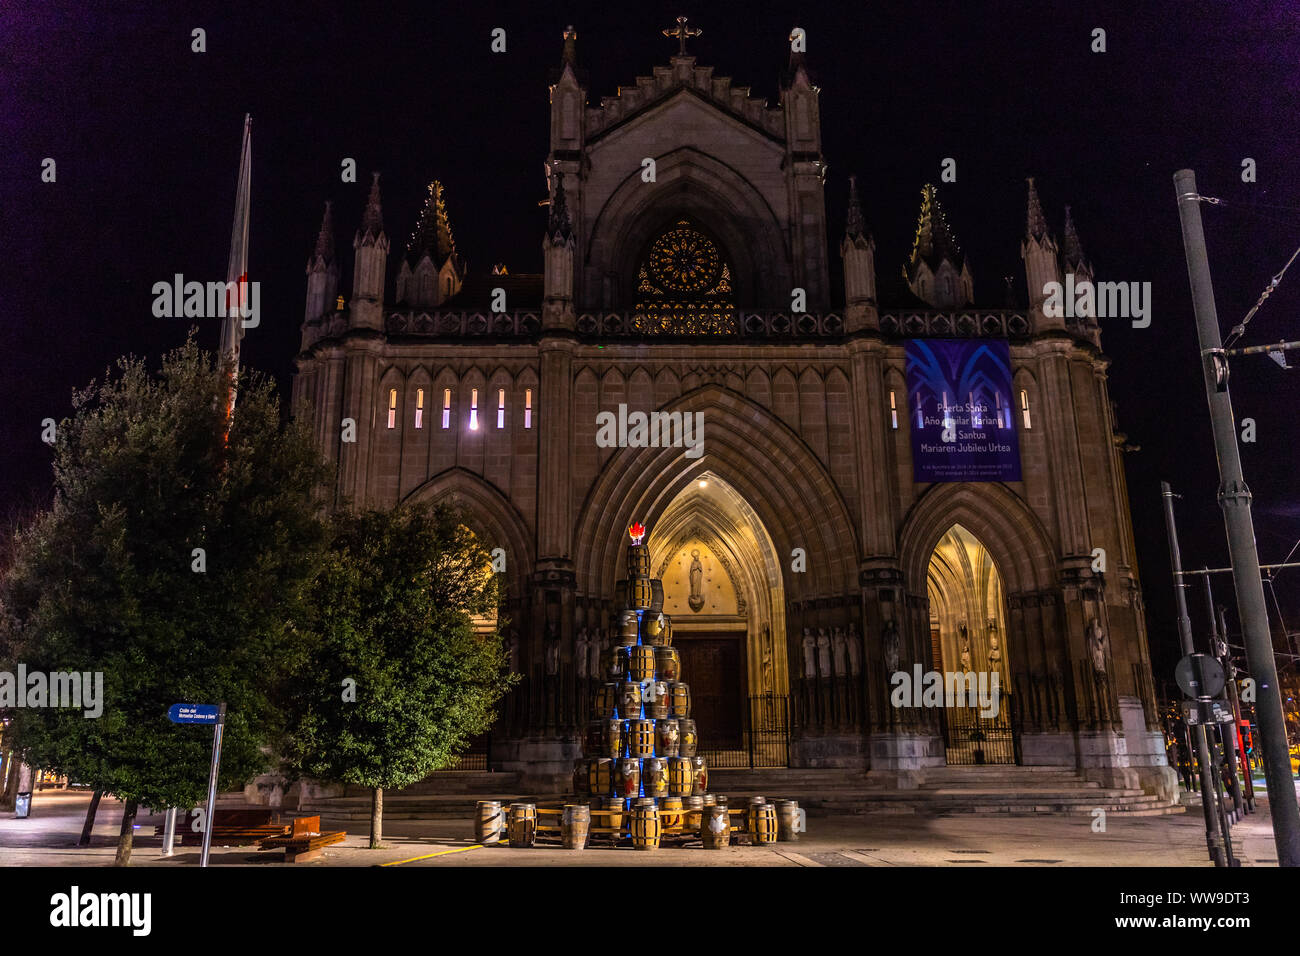 Night view of the new cathedral of Vitoria Gasteiz (Catedral de Maria Inmaculada), built in the first half of 20th century, Basque Country, Spain Stock Photo